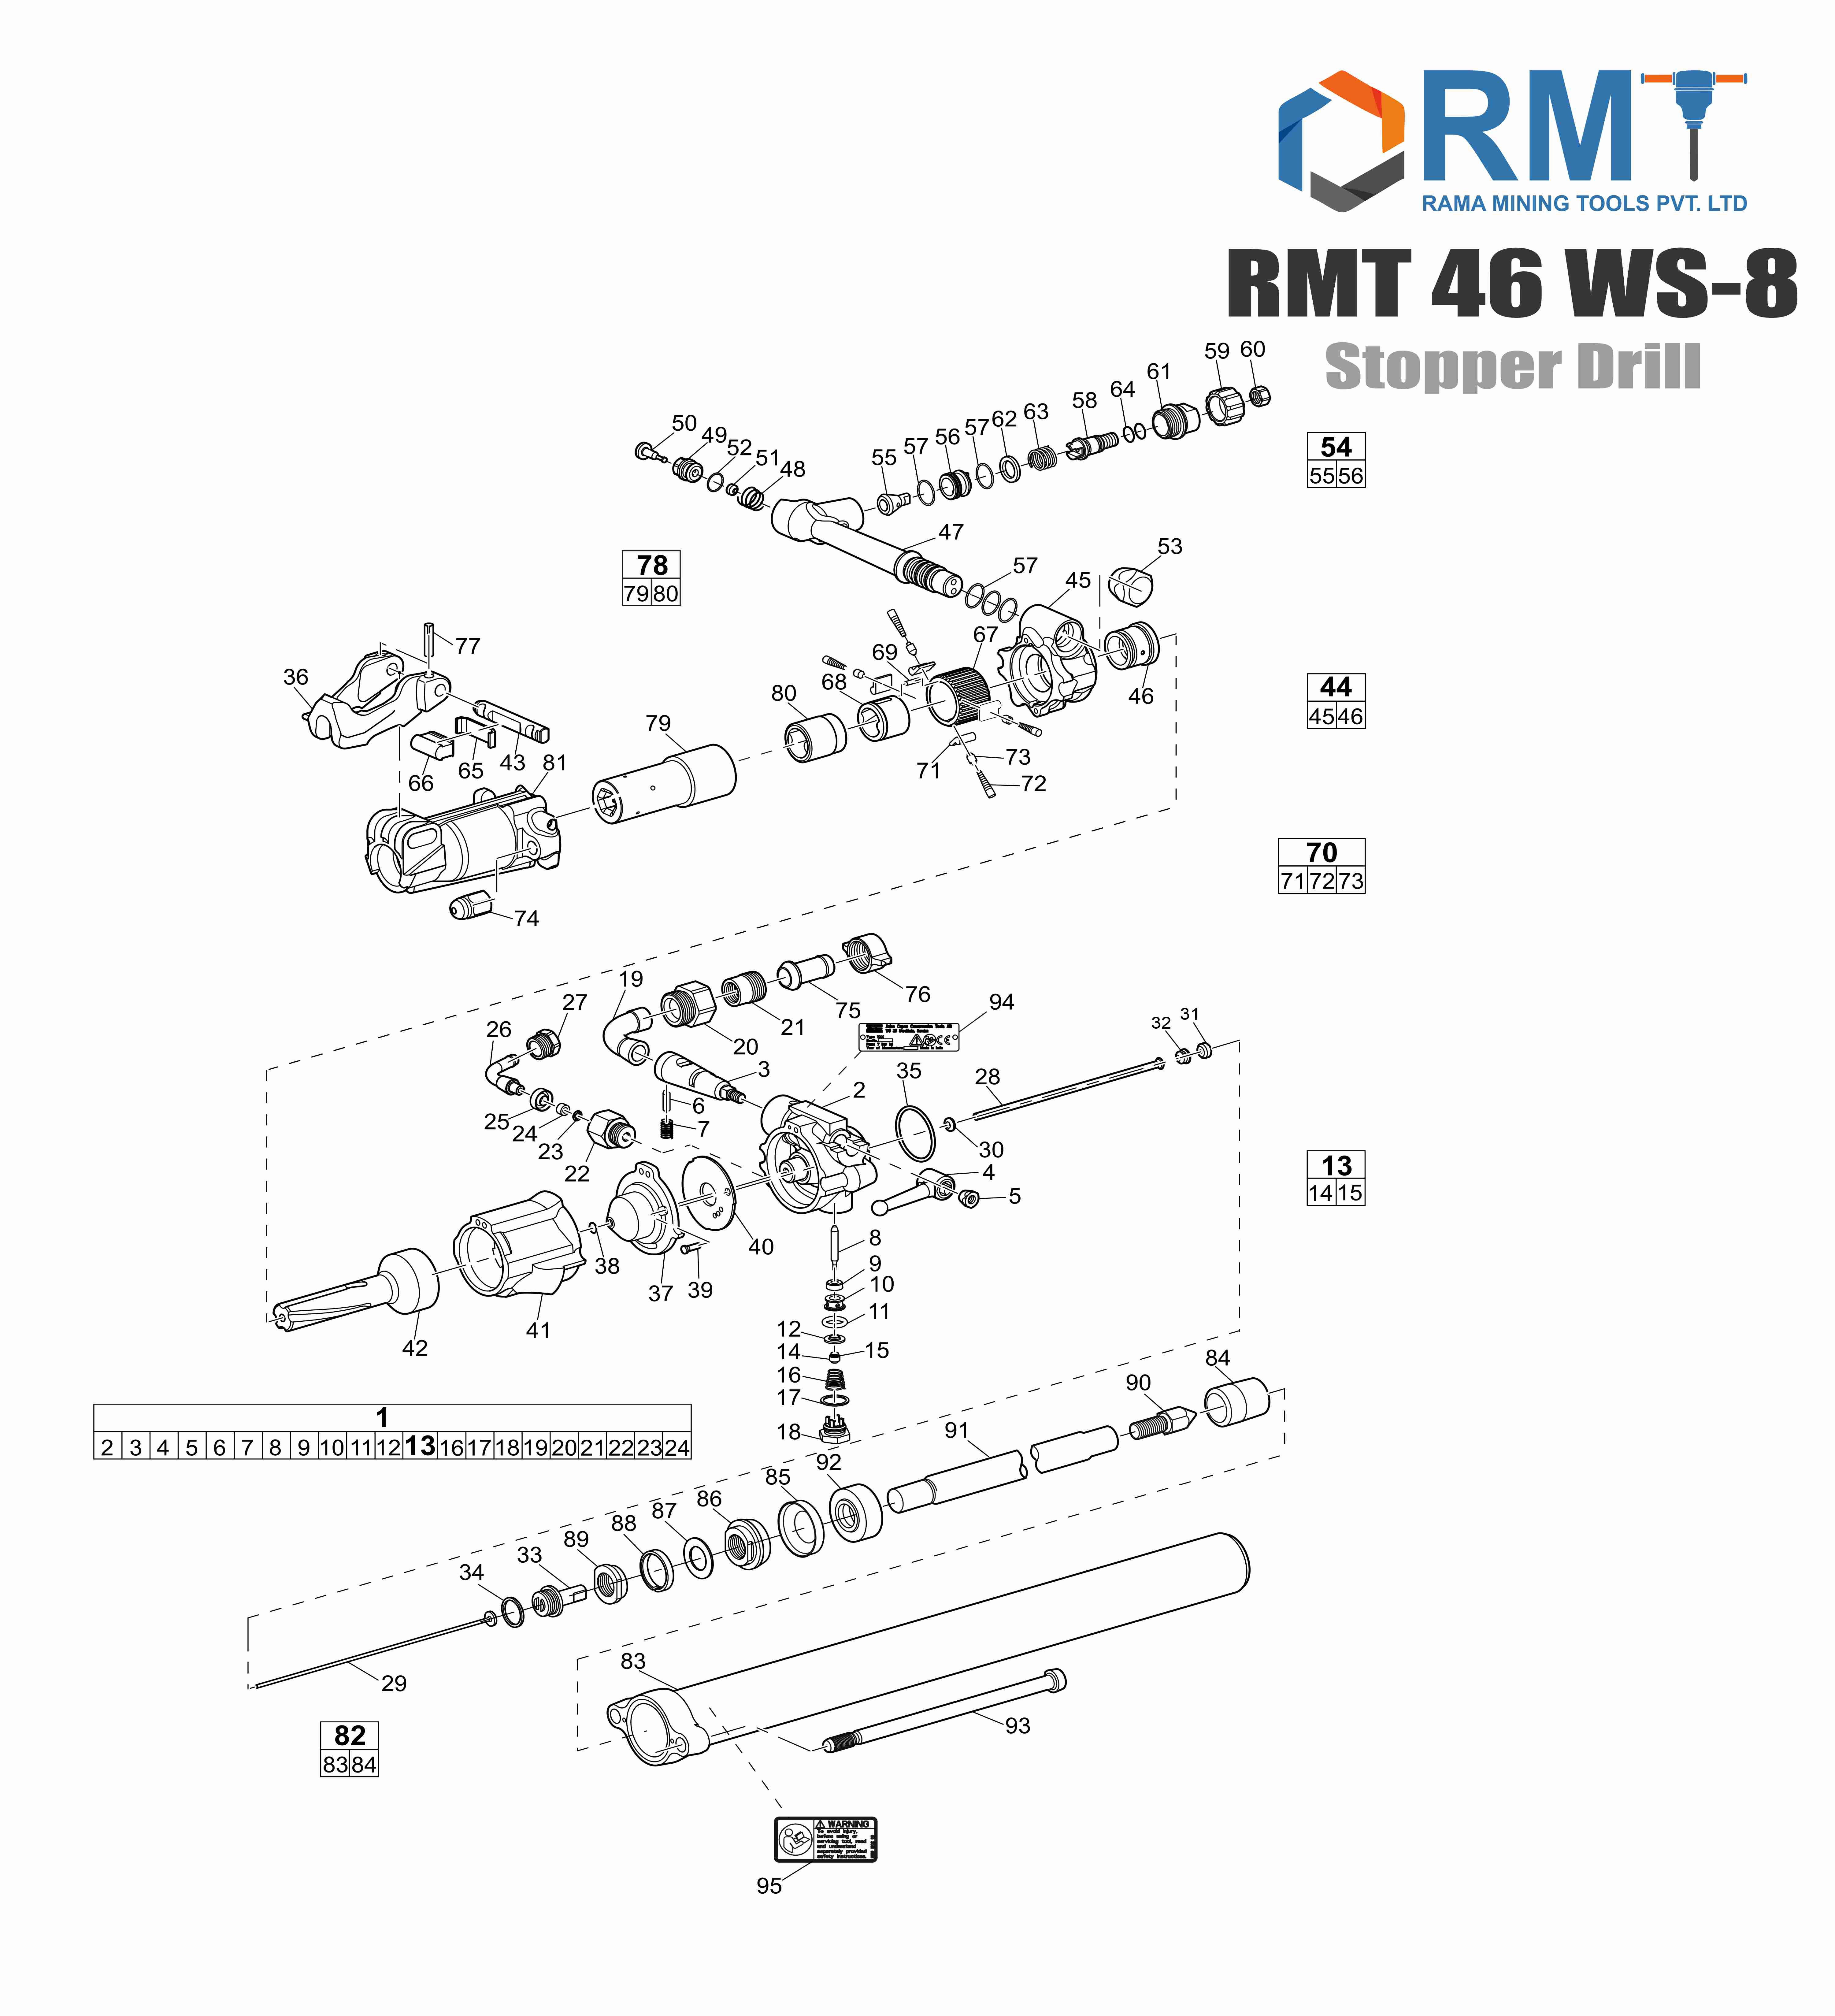 RMT 46 WS-8 - Stopper Drill